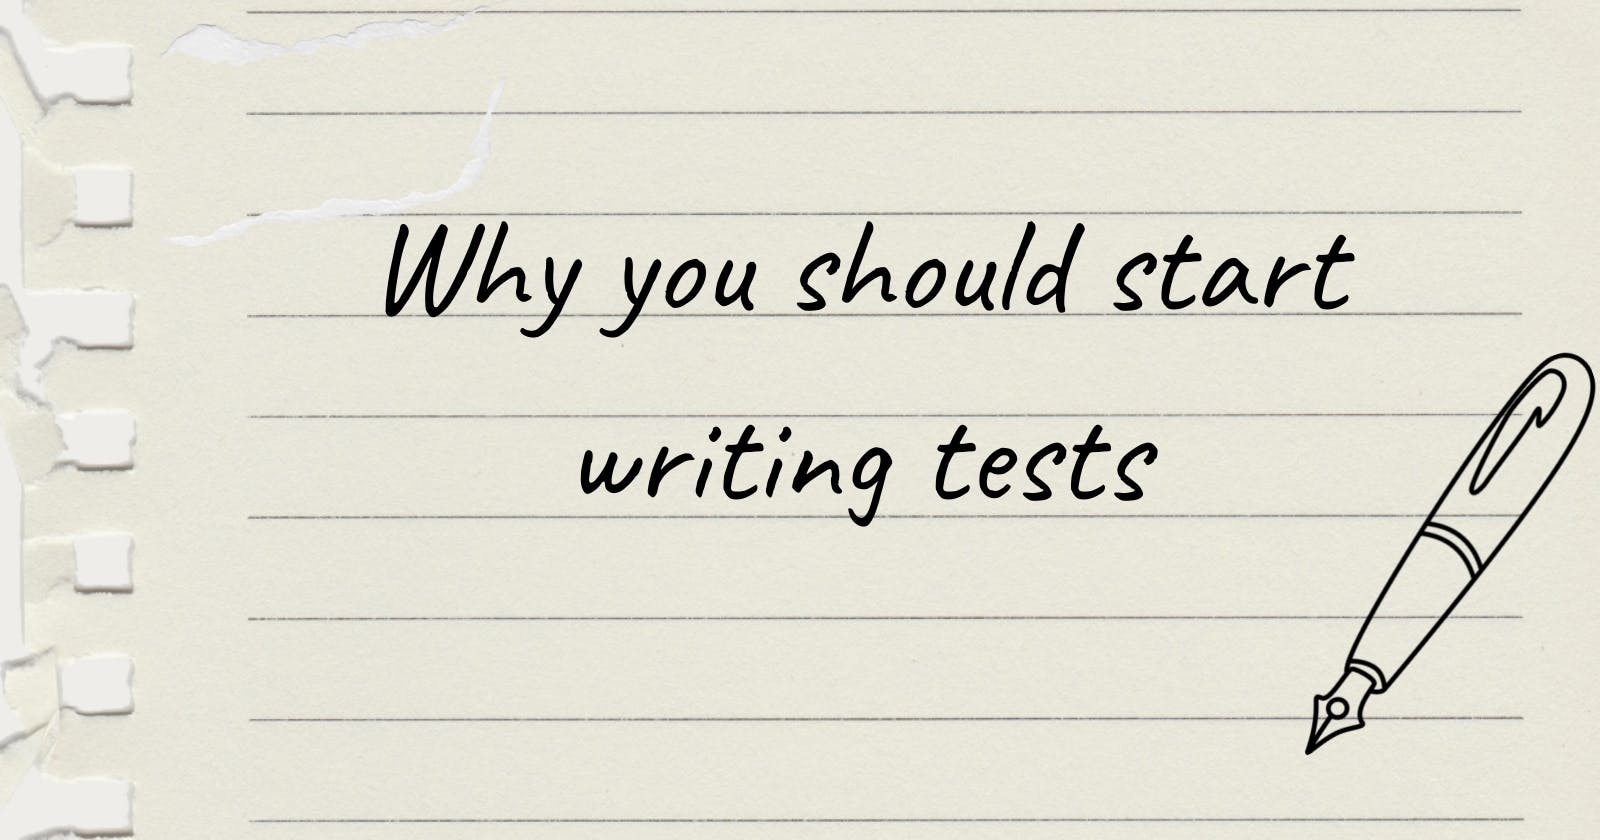 Why you should start writing tests - Thoughts about  the advantages of TDD and unit tests